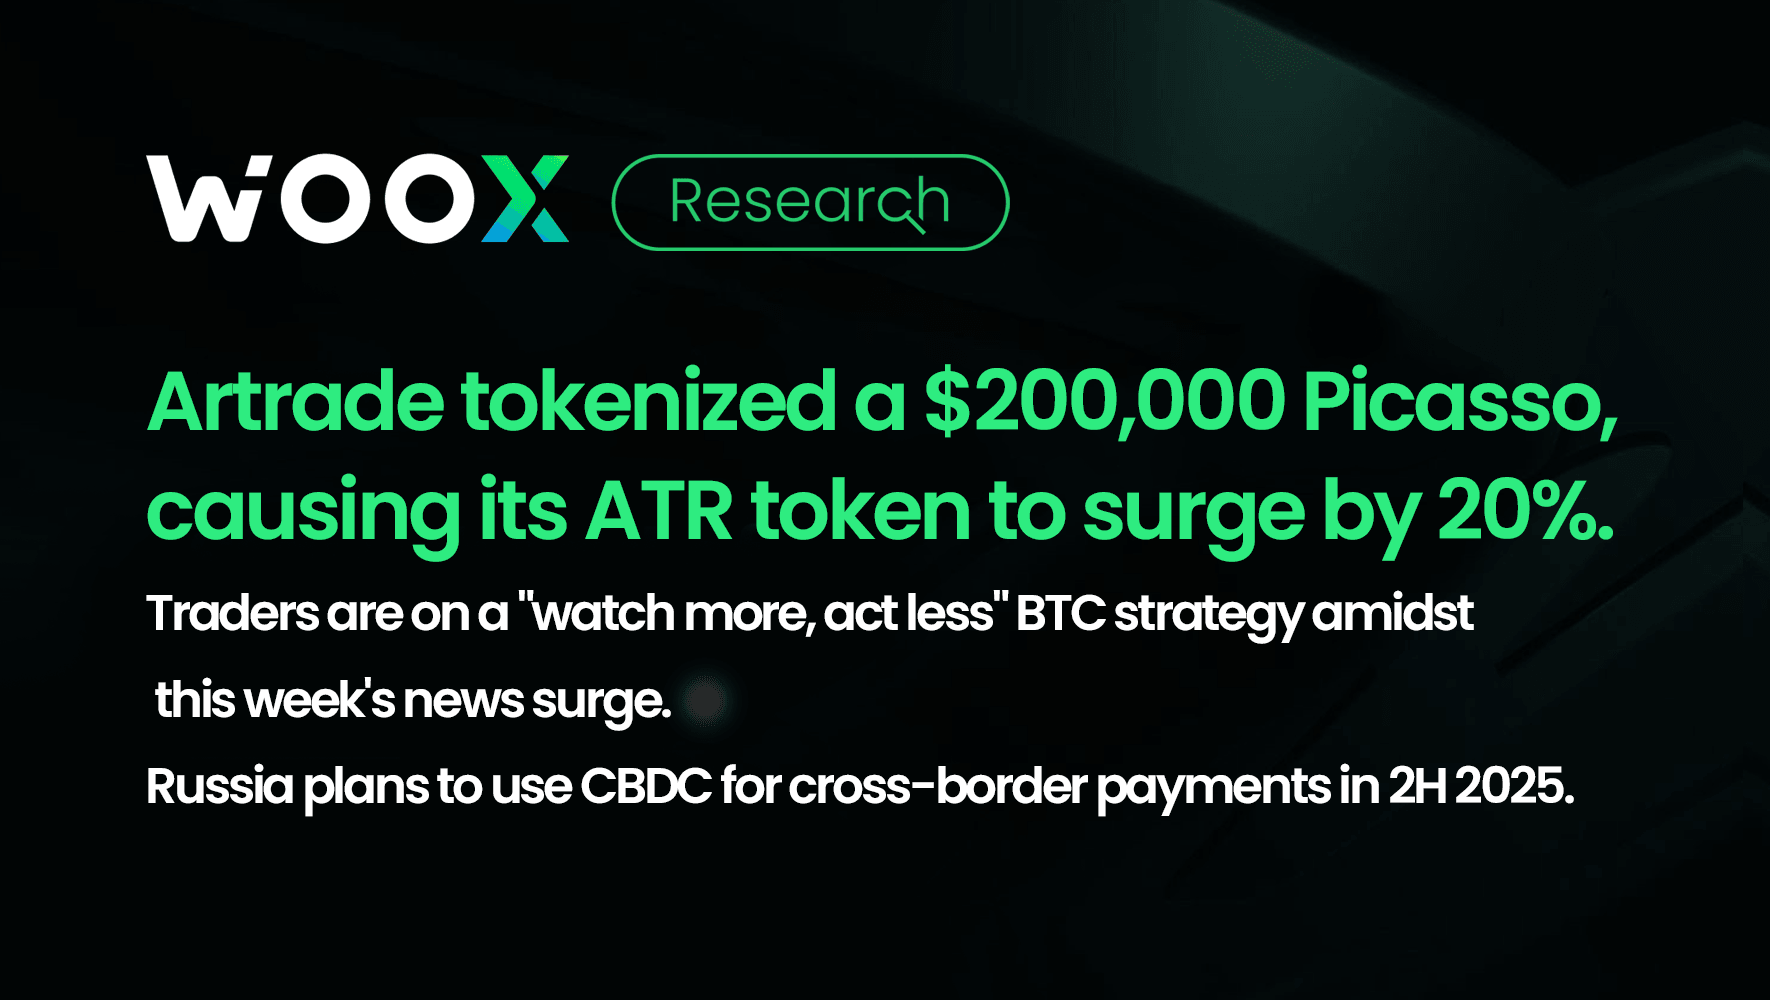 Artrade tokenized a $200,000 Picasso, causing its ATR token to surge by 20%.